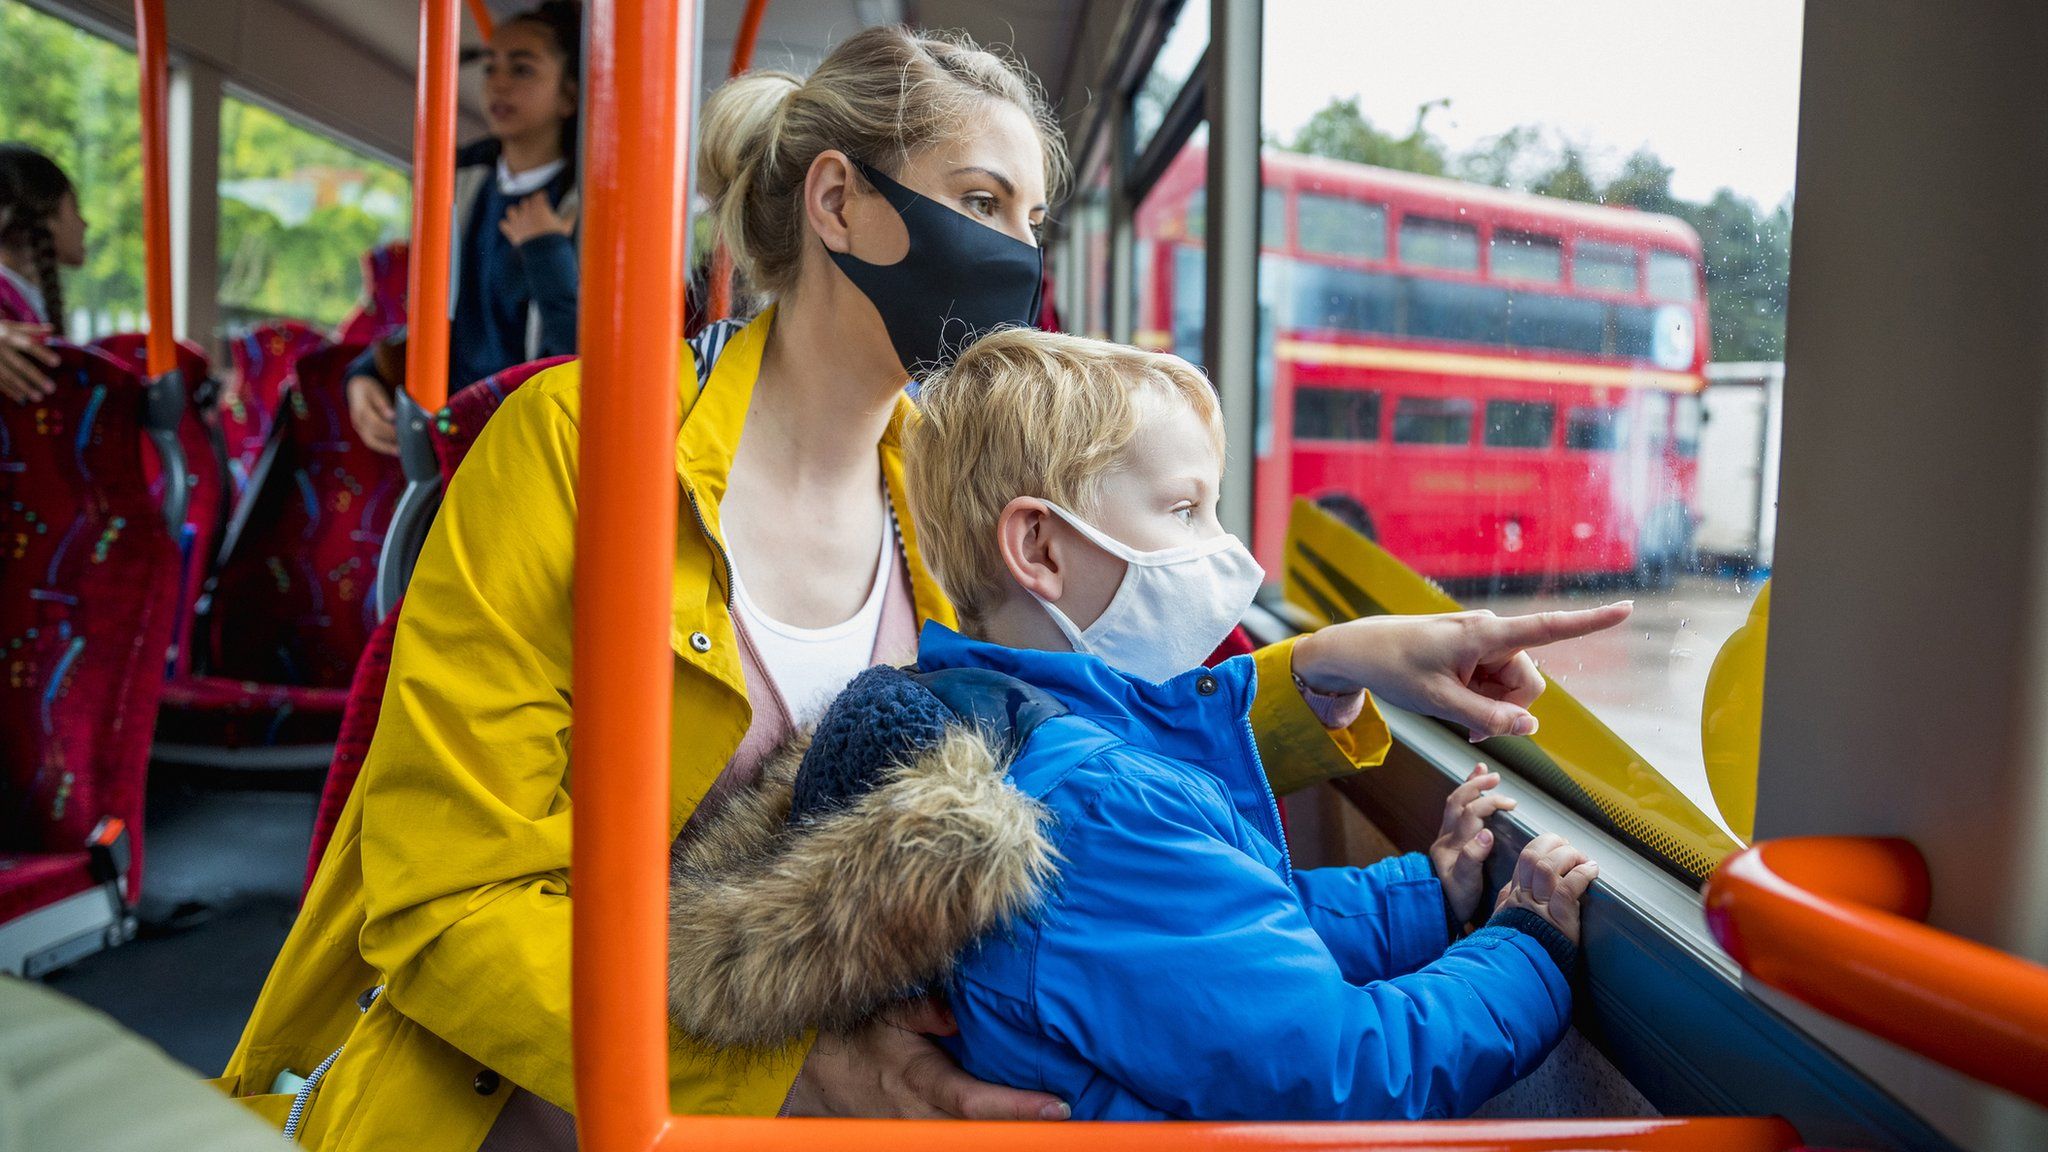 Mother and son on the bus wearing face masks